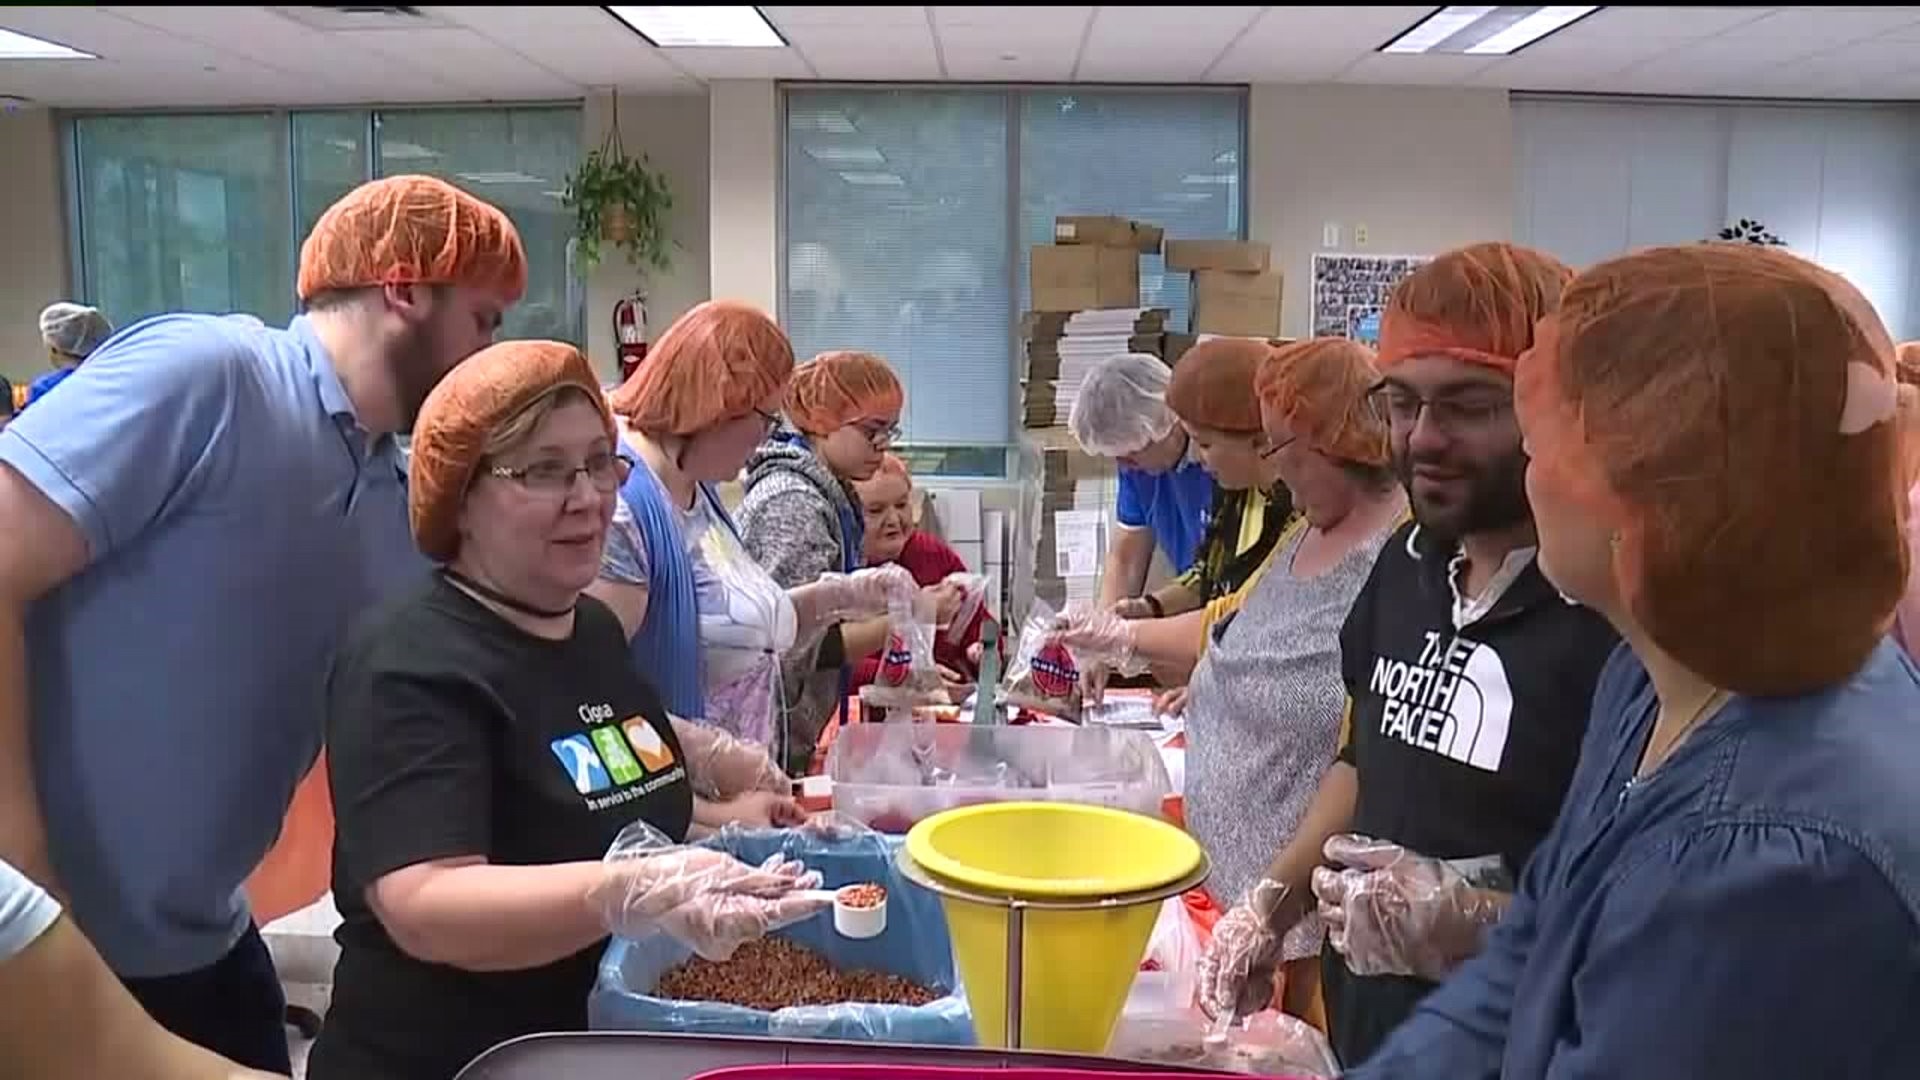 Coworkers` Commitment to Fight Hunger